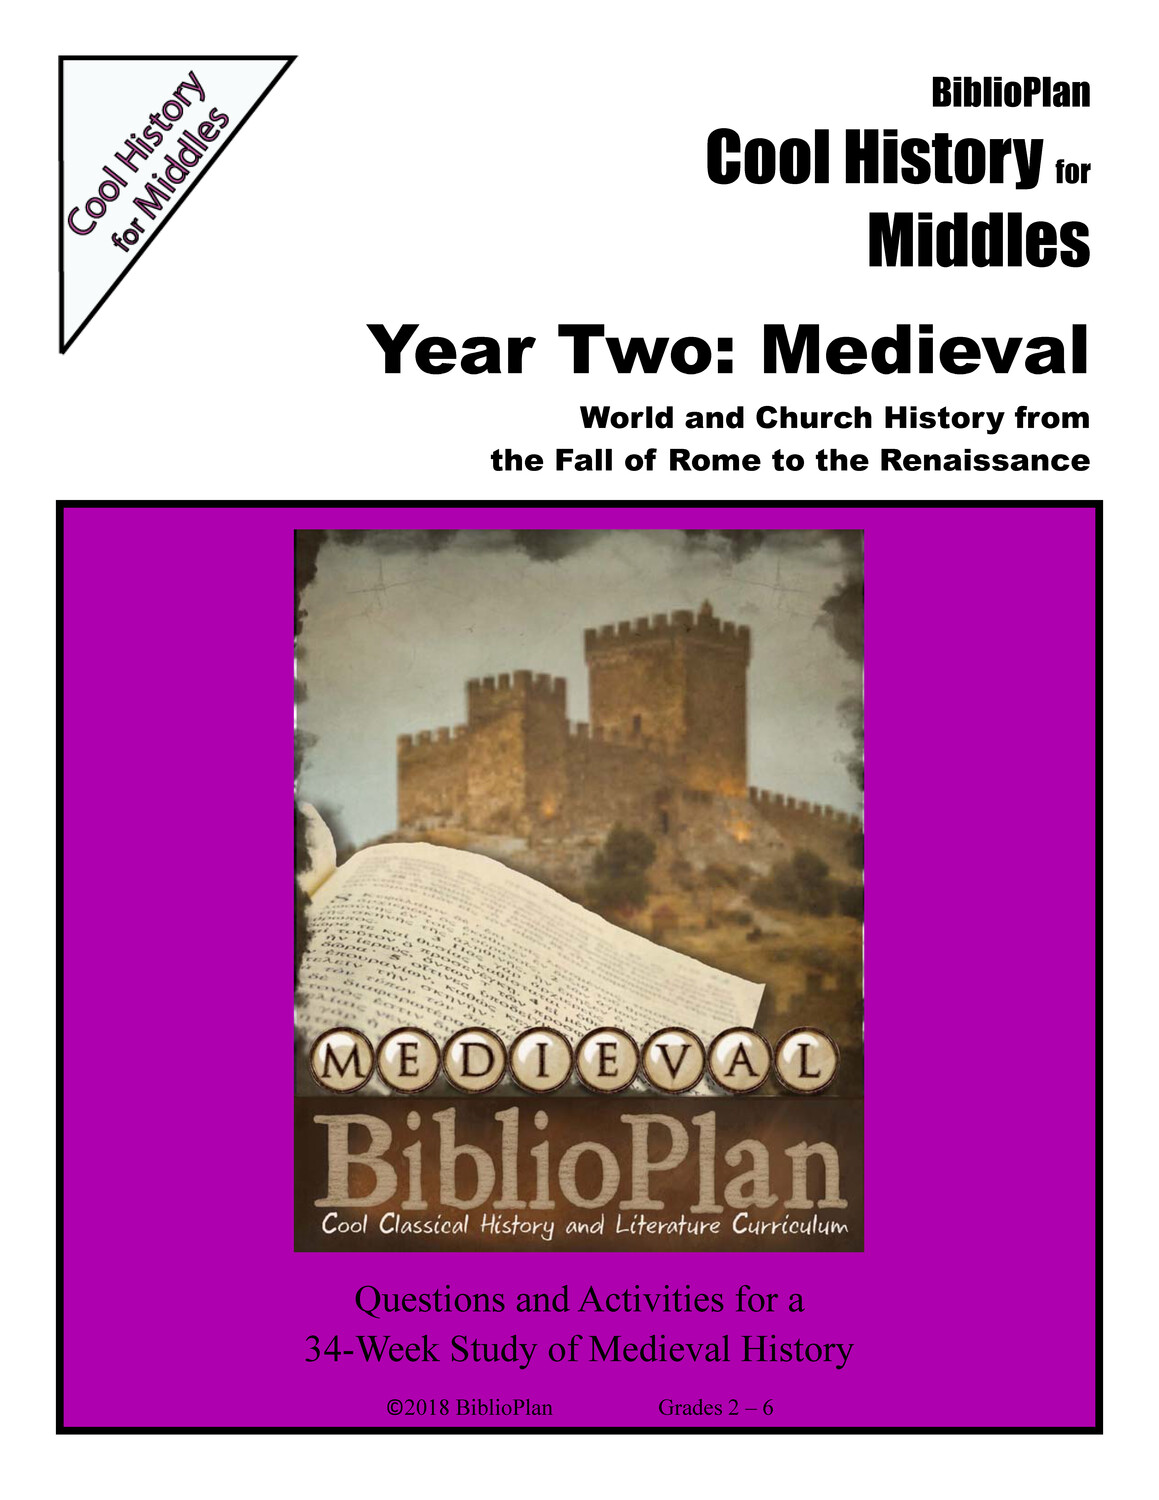 Medieval Cool History for Middles Hardcopy